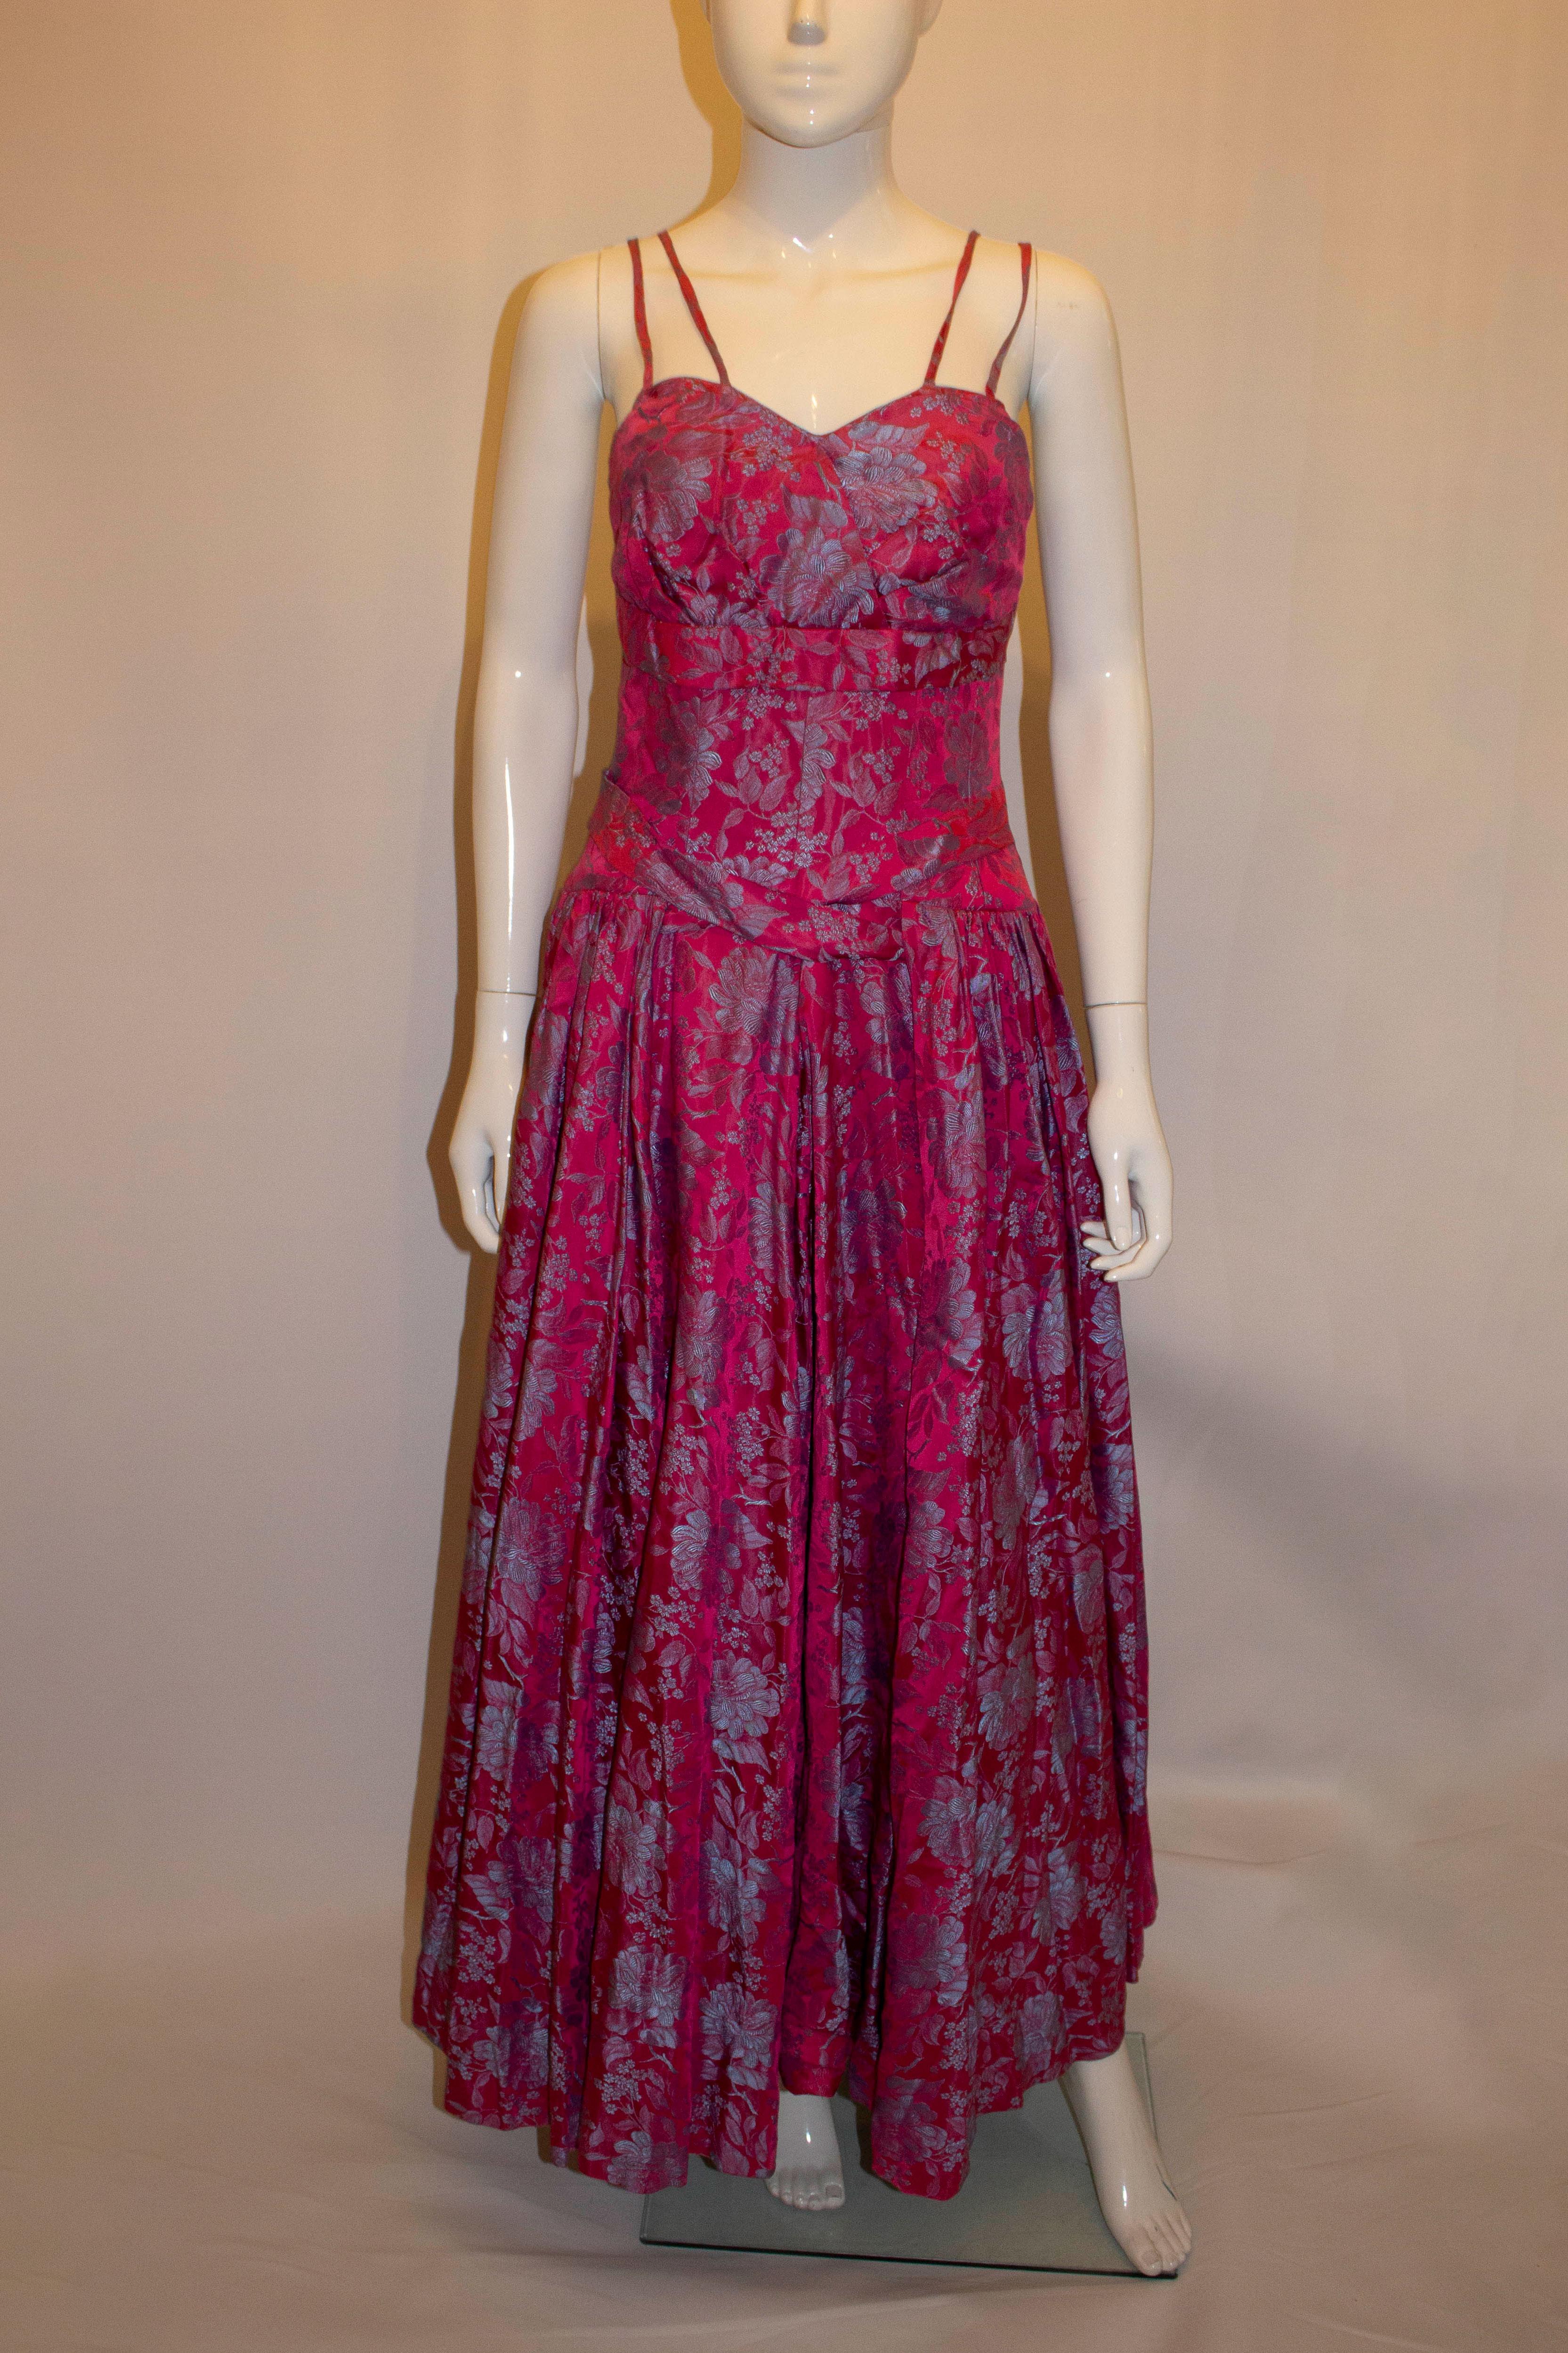 A headturning vintage party /evening dress by Lee Delman. In rose pink with a sky blue background., the dress has a cross over front , full skirt with netting , a central back zip and thin straps. Measurements: Bust 34'', waist 28'', length 56''